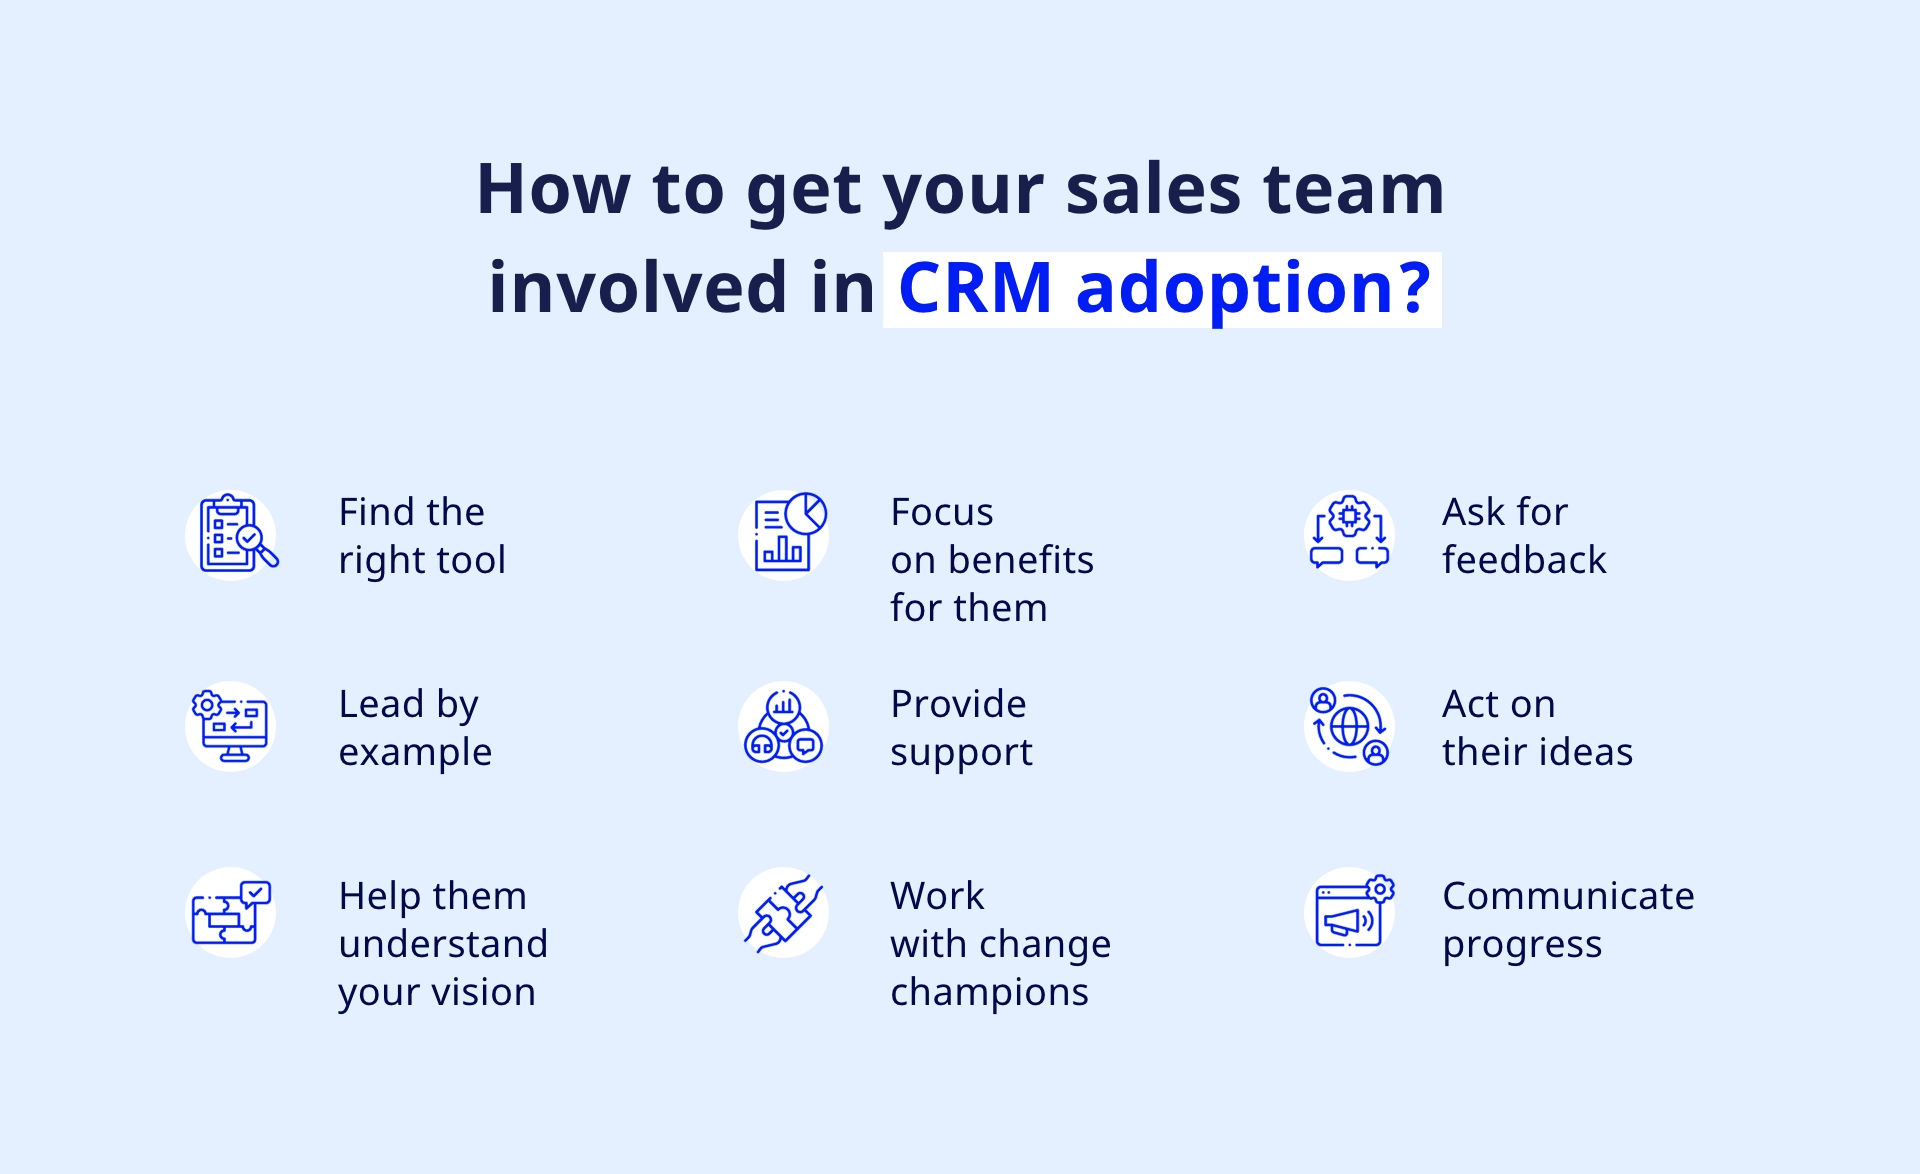 How to get your sales team involved in CRM adoption